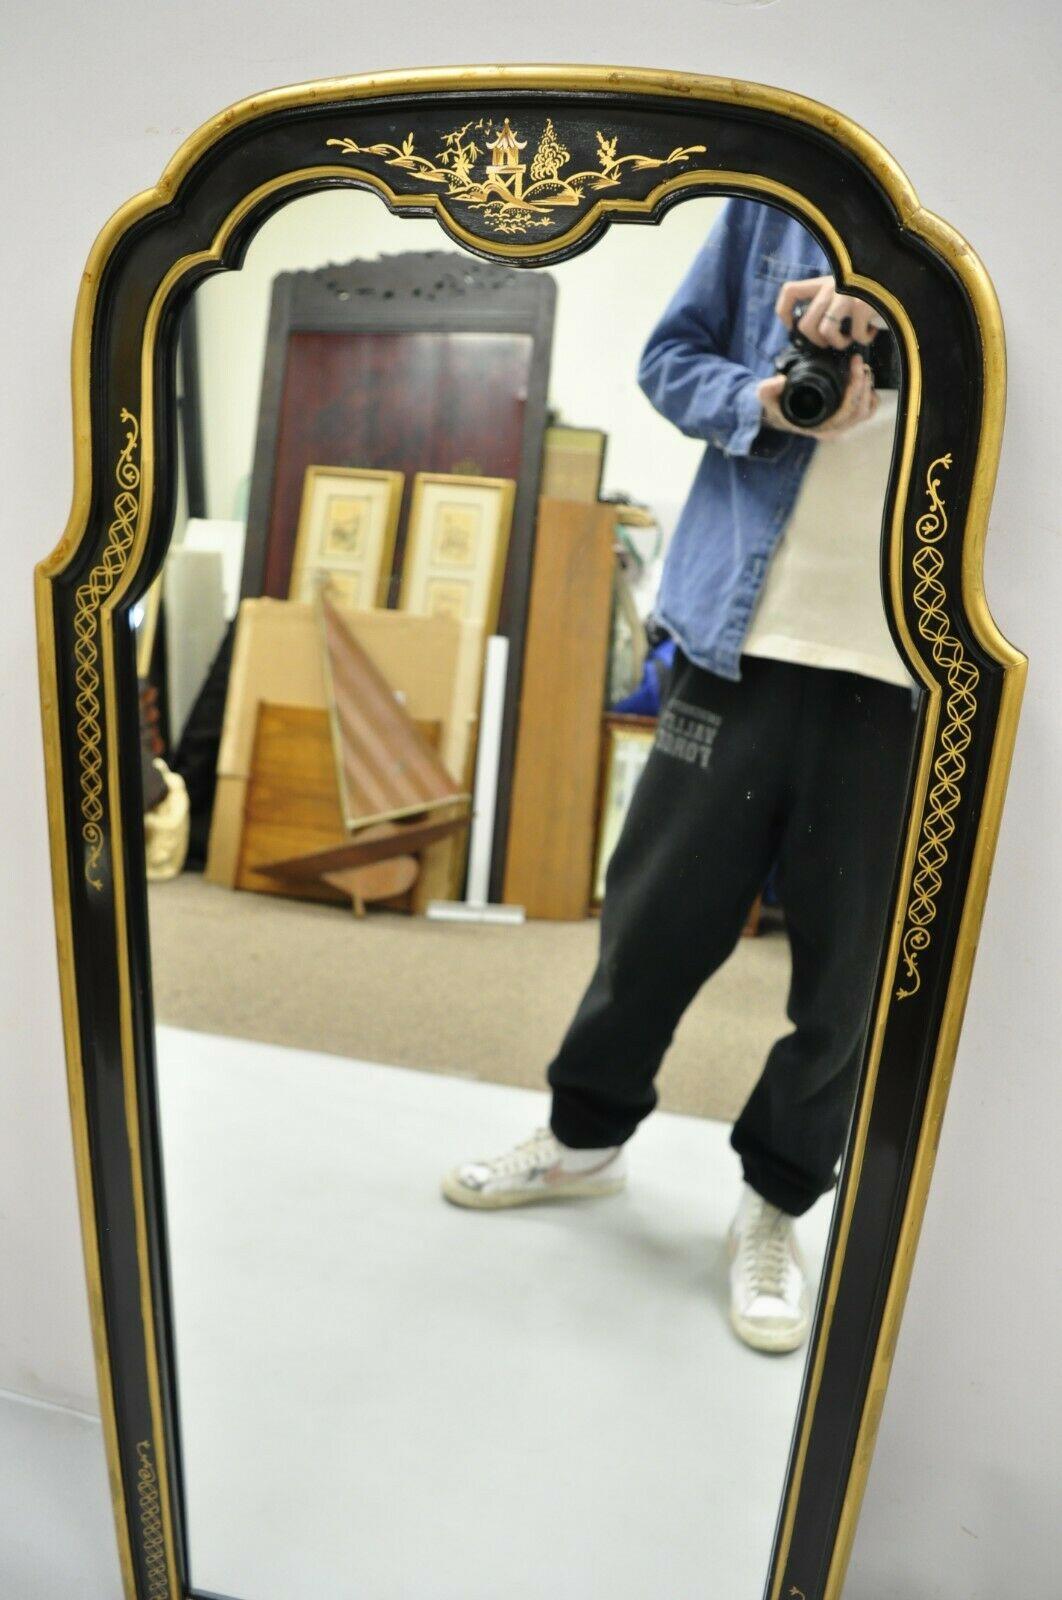 Vintage Chinoiserie Drexel Et Cetera style black gold arch wall mirror. Item features a black and gold painted finish, molded foam frame, very nice vintage item, great style and form. Circa Mid to Late 20th Century. Measurements: 48.5